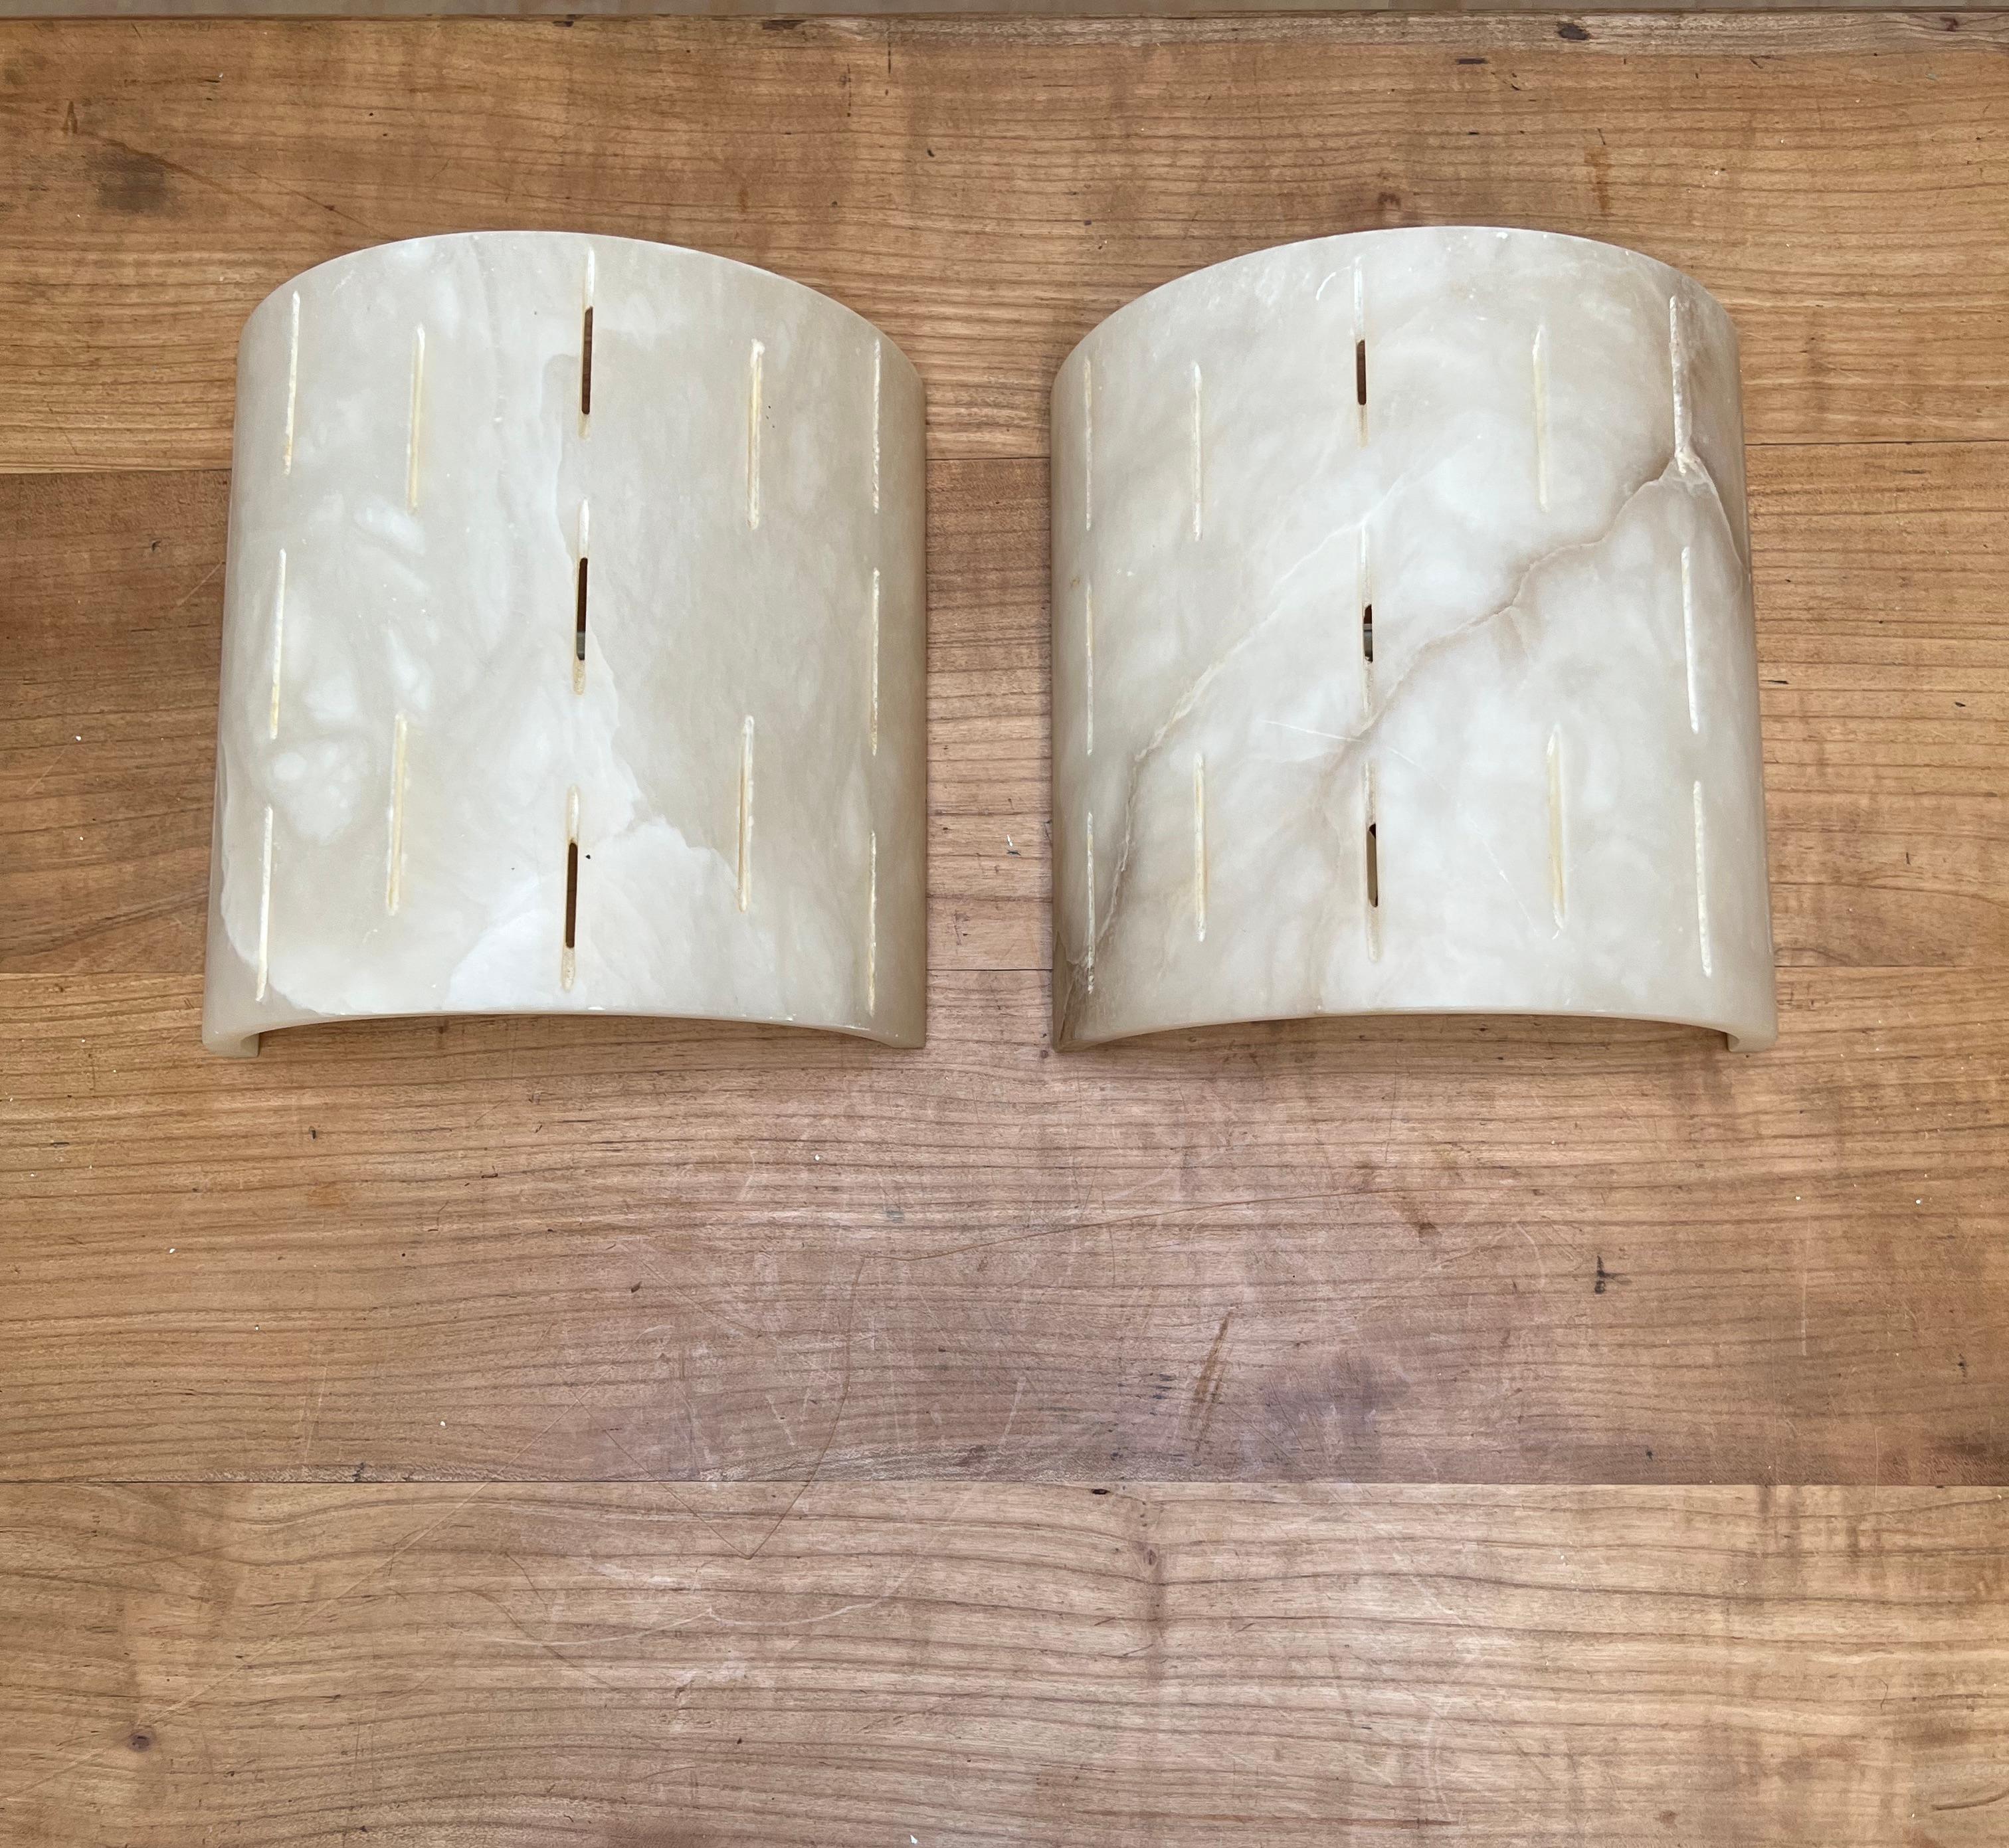 Timeless Design Pair of Art Deco Style Alabaster Wall Sconces / Light Fixtures For Sale 11